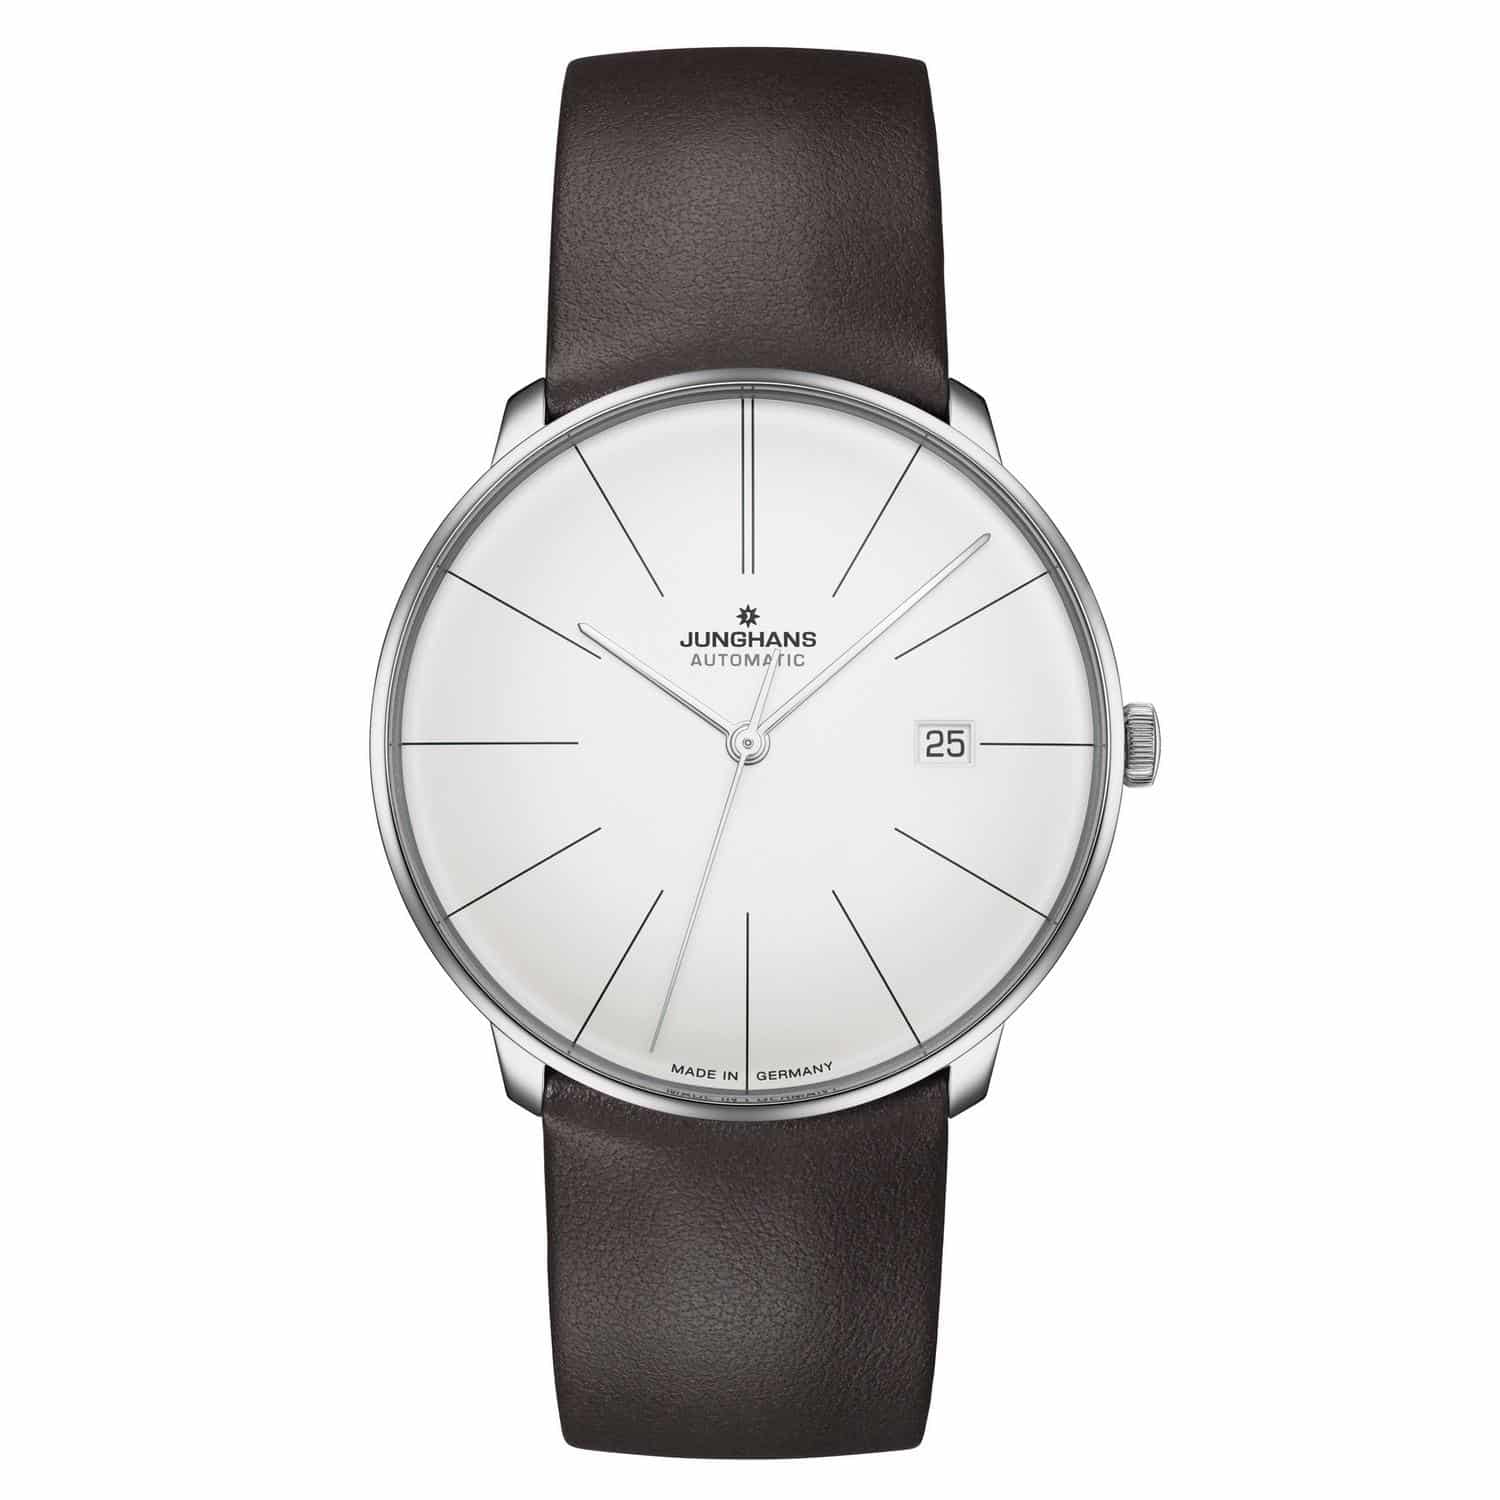 JUNGHANS MEISTER FEIN AUTOMATIC - 027-4152-00